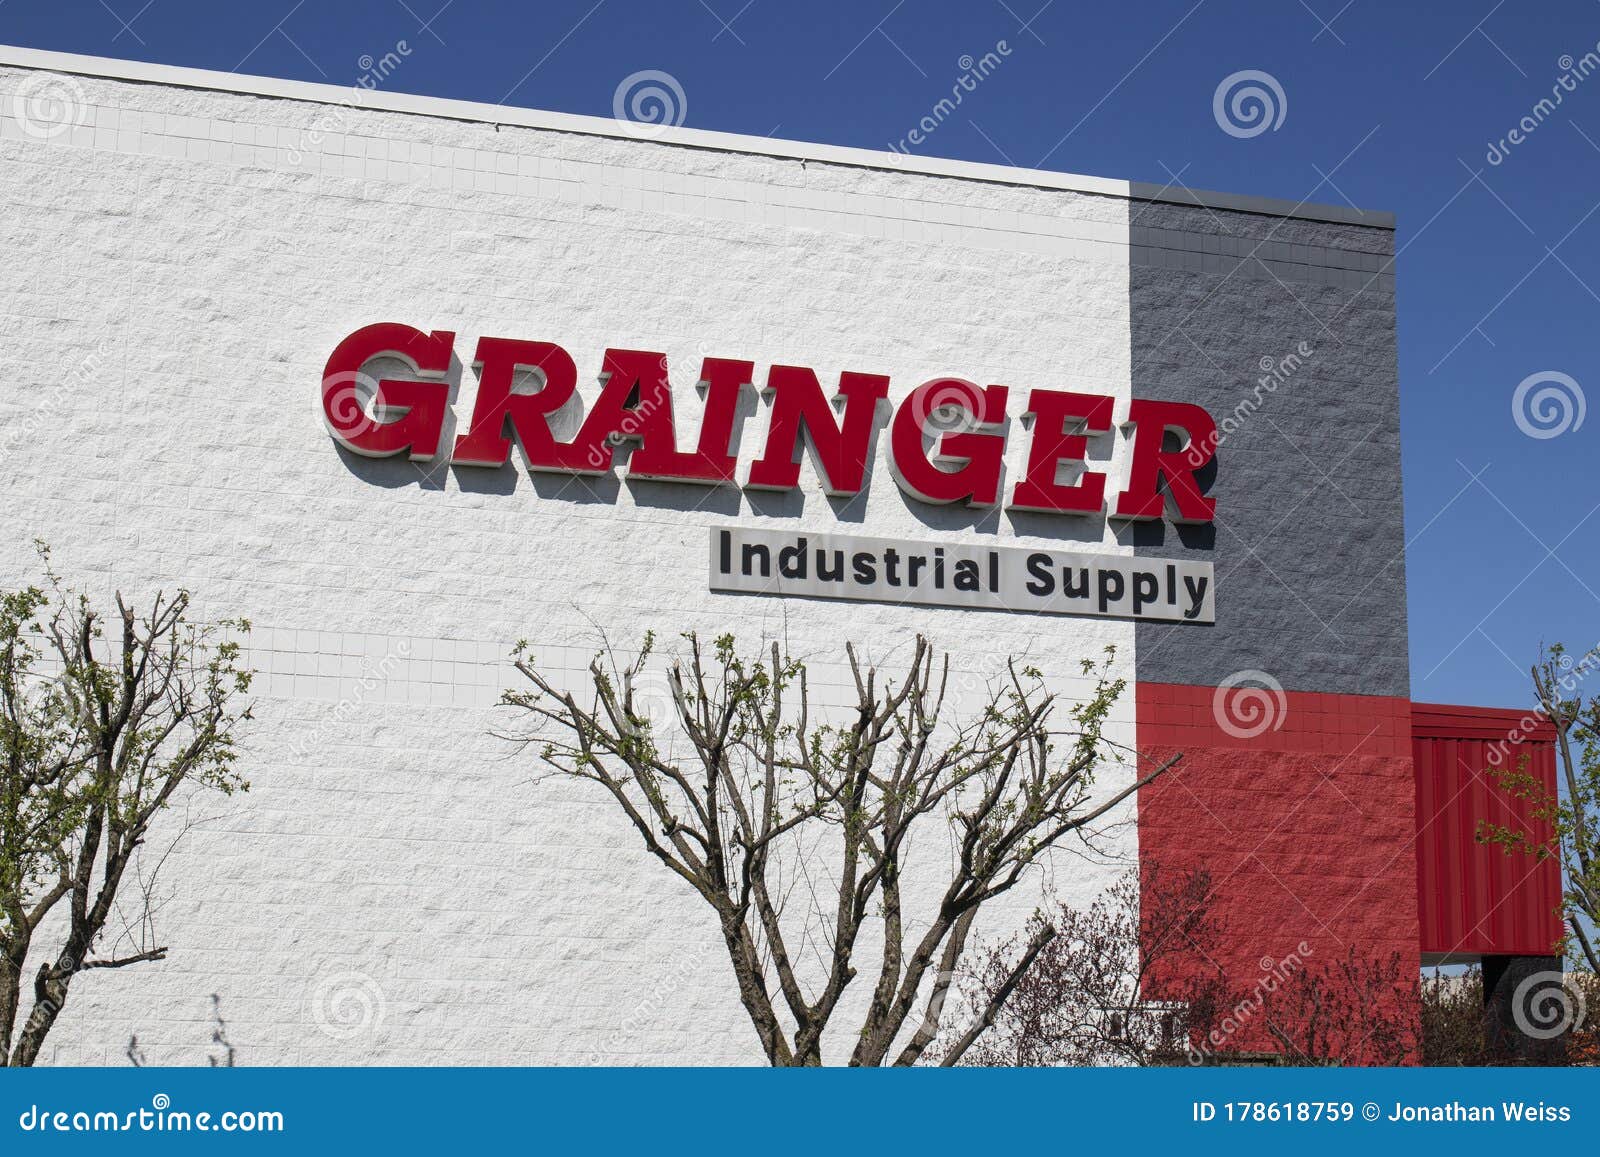 Grainger Industrial Supply Warehouse Ww Grainger Is A Hardware And Safety Supply Manufacturer Editorial Stock Image Image Of Supplies Ecommerce 178618759